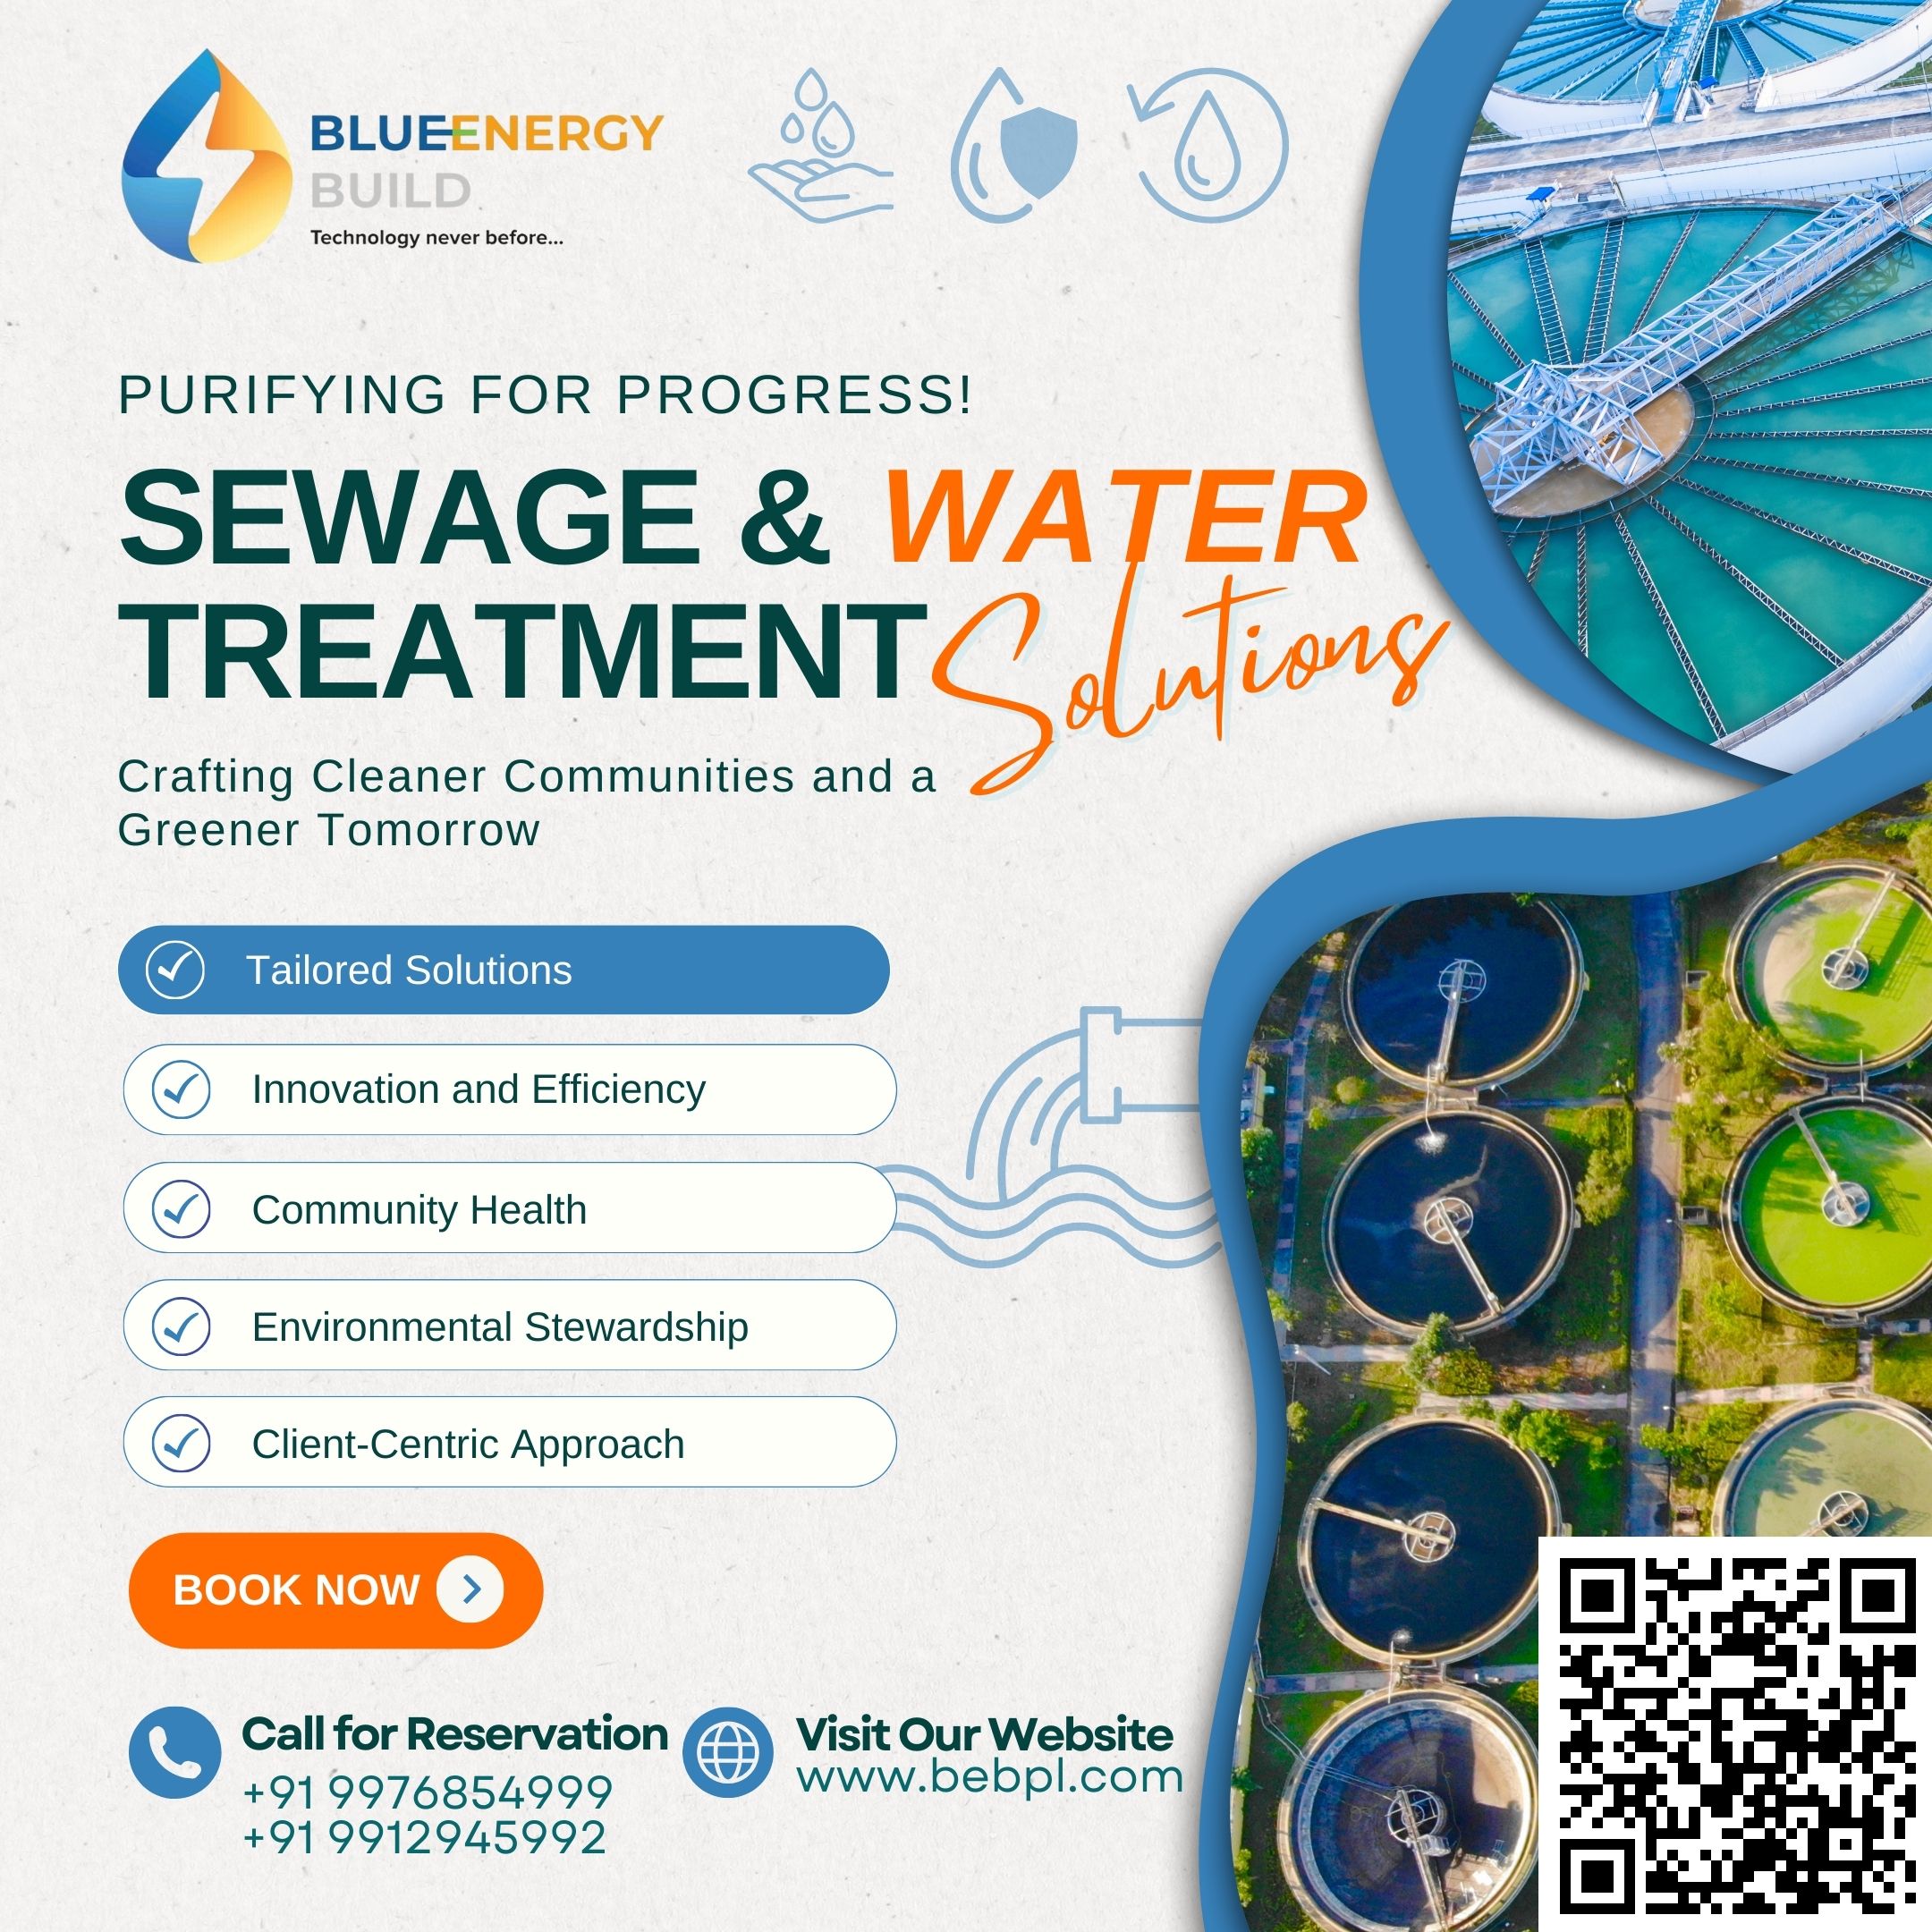 BlueEnergy Build Sewage and Water Treatment Solutions